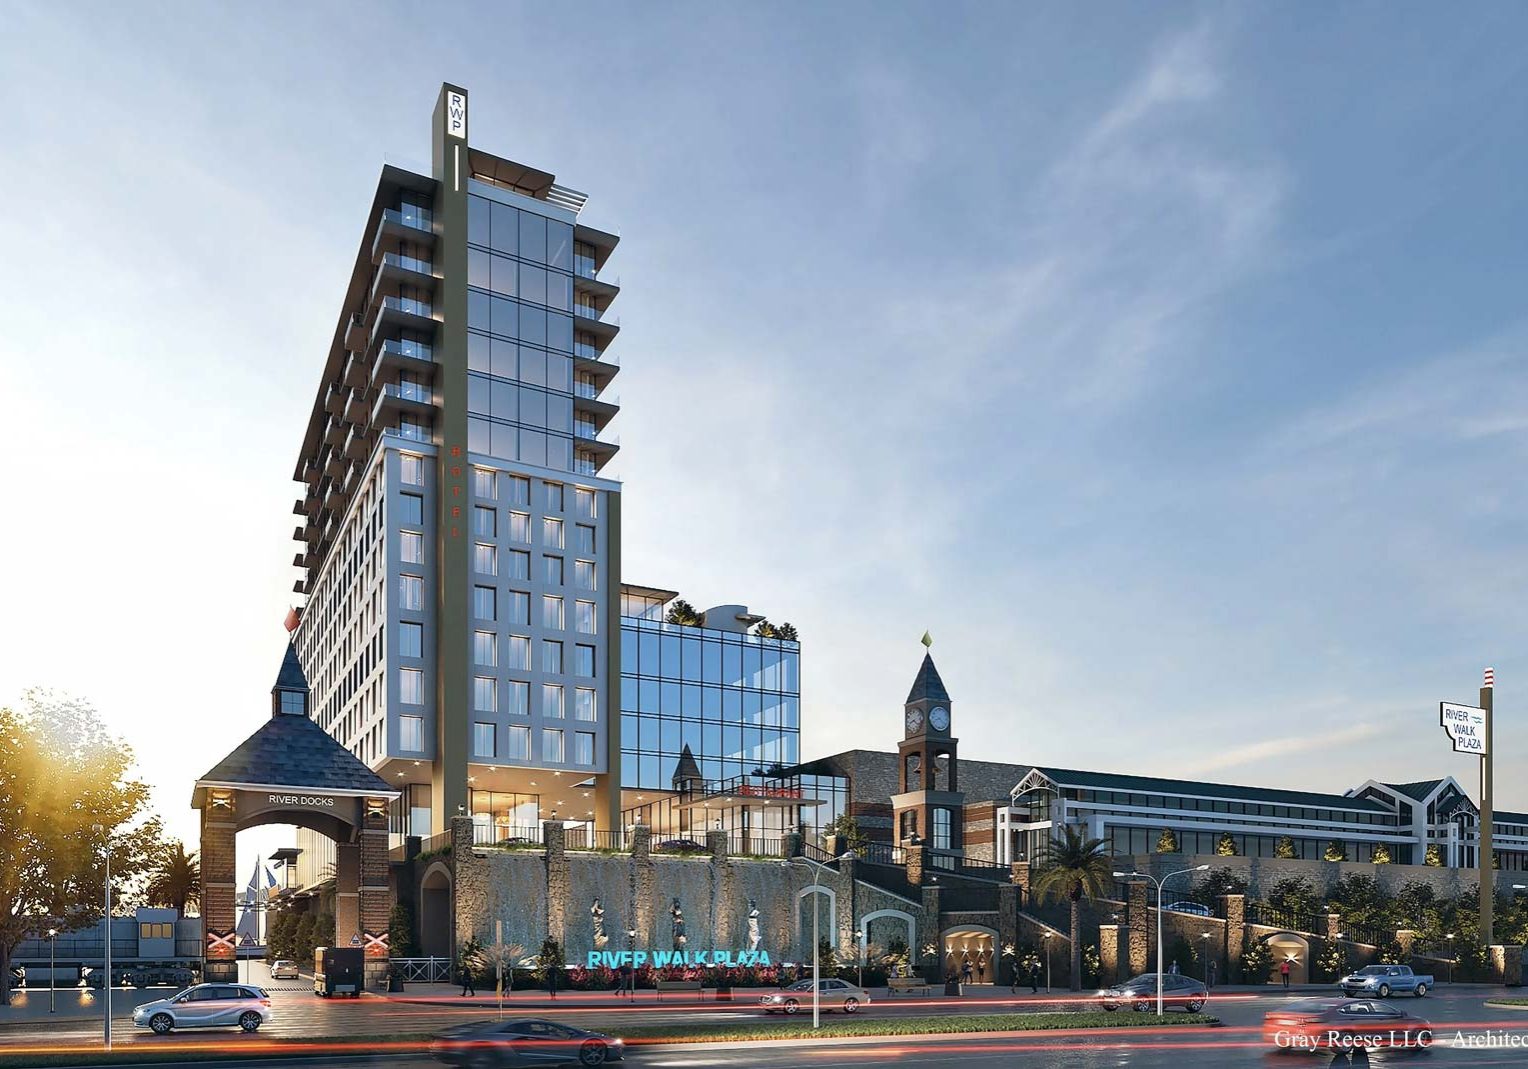 River Walk Plaza Development Plans For Downtown Mobile Announced